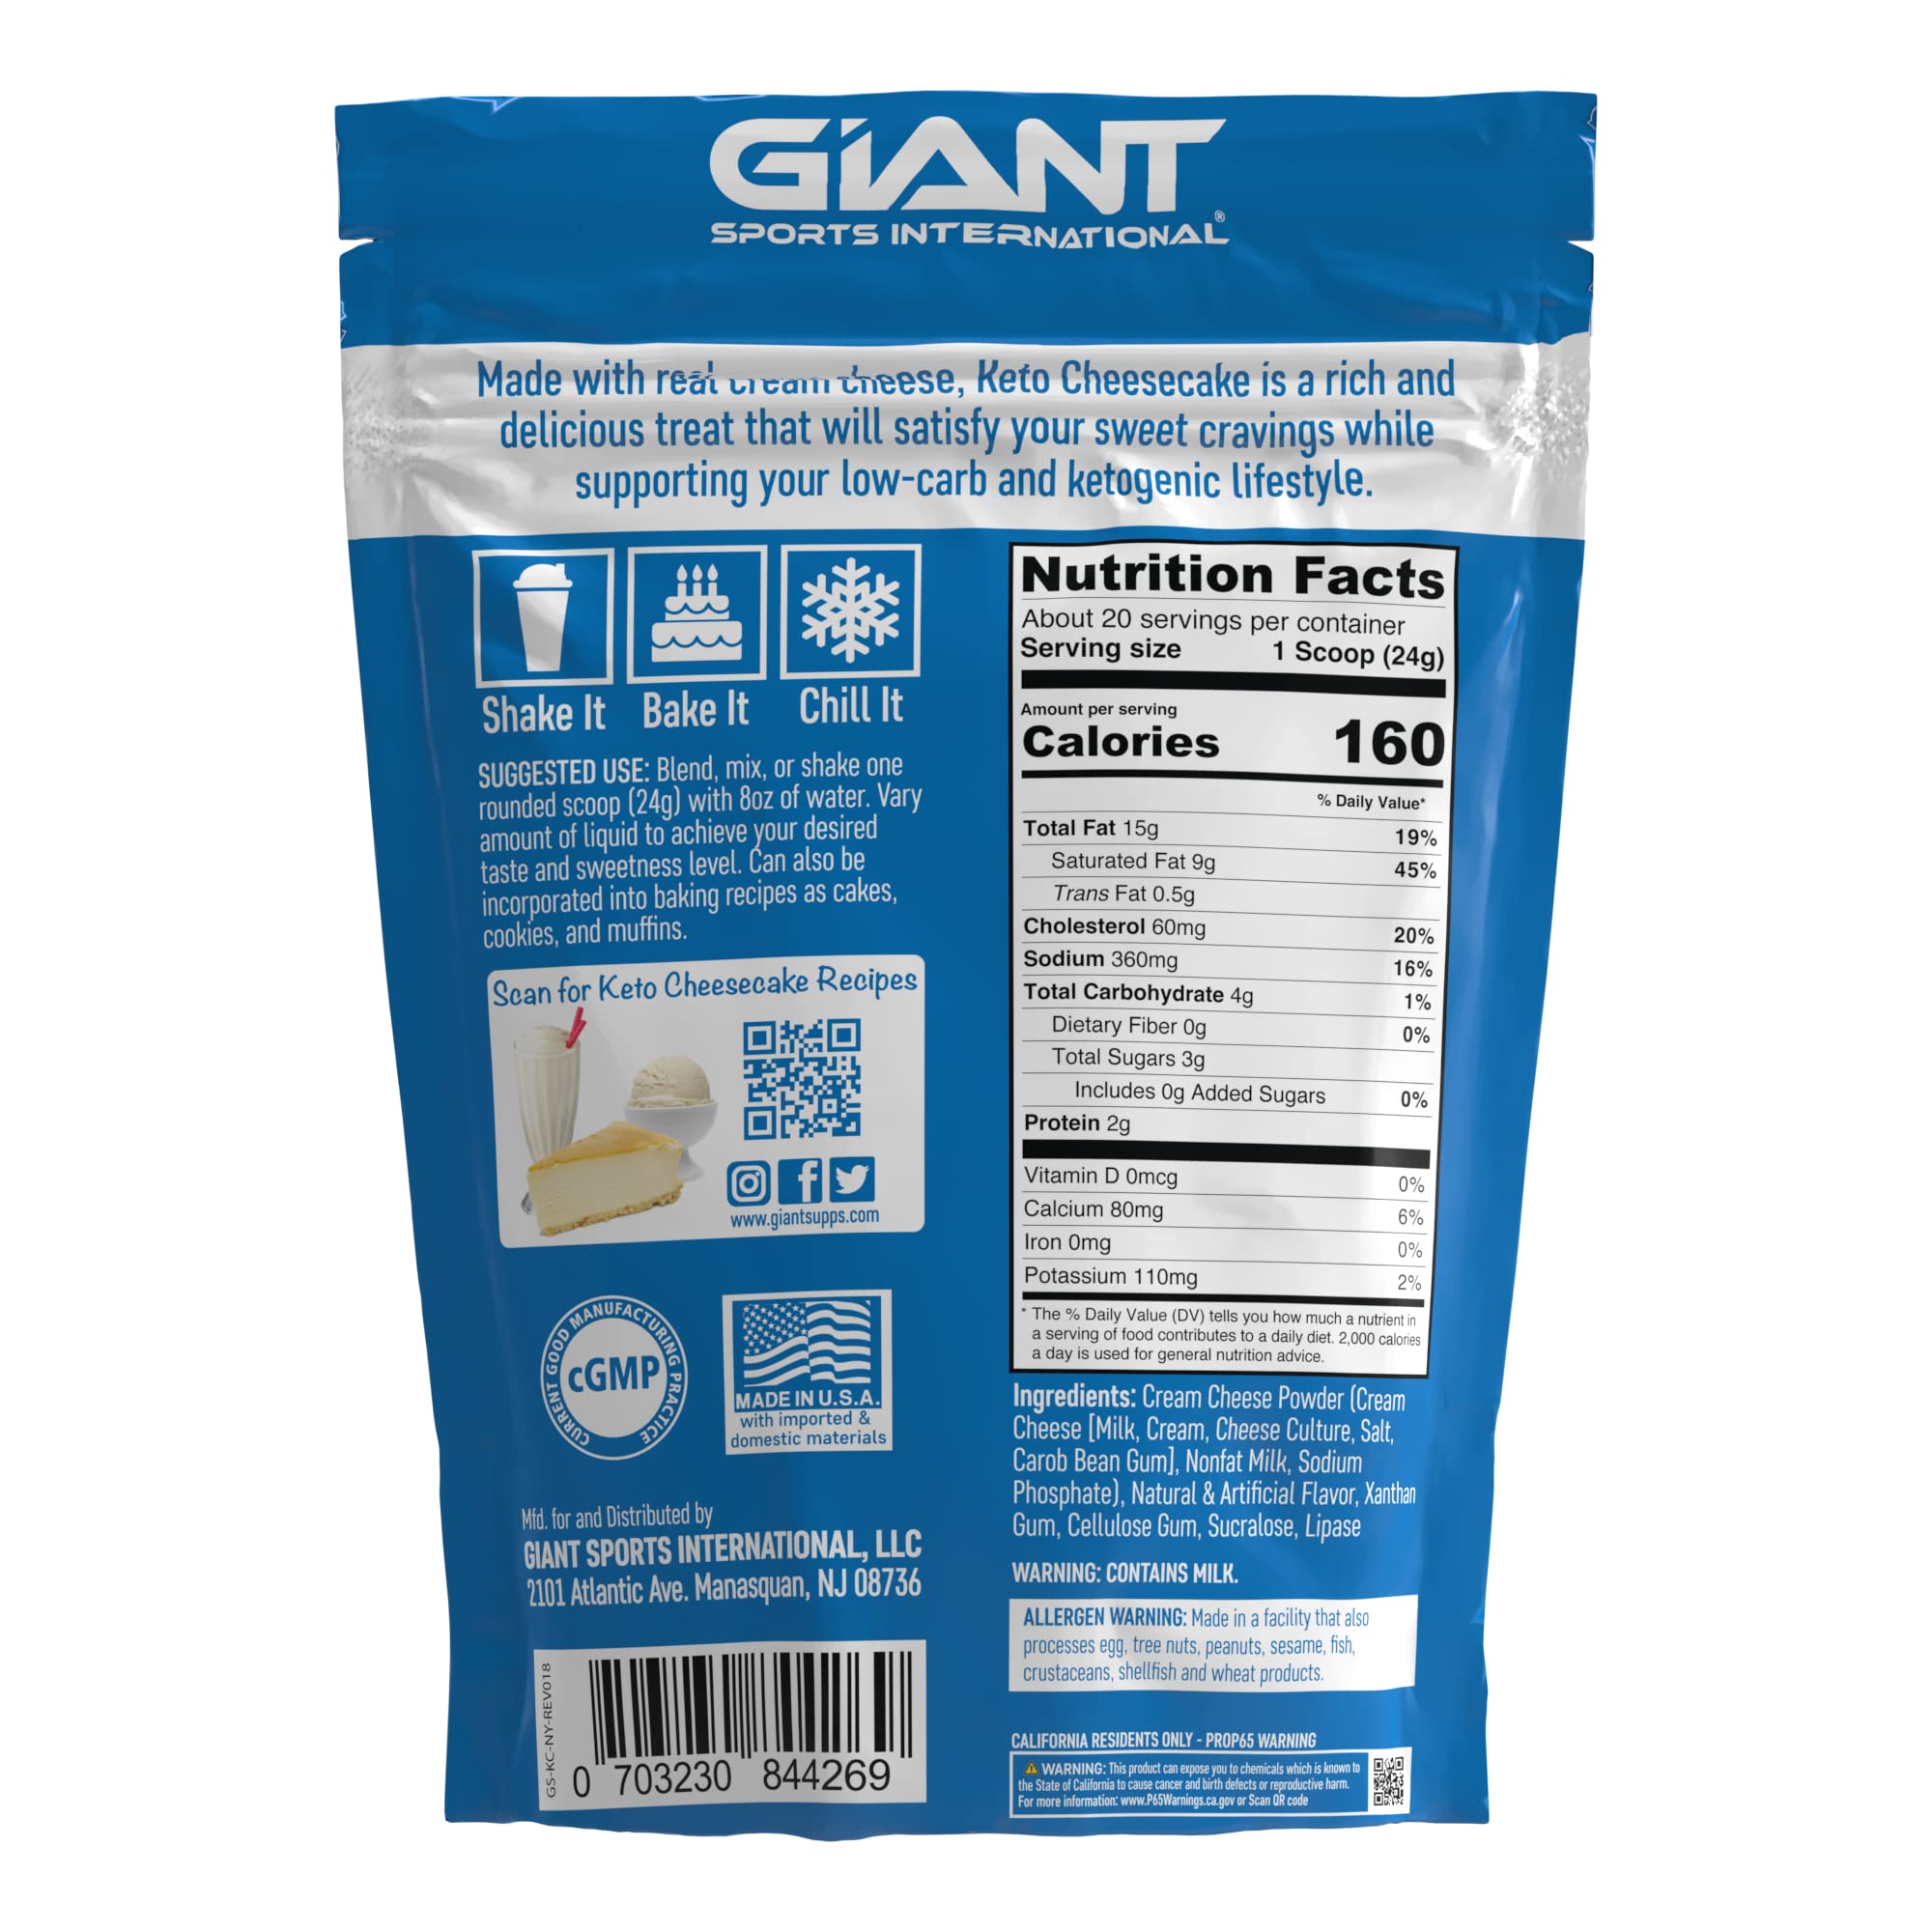 Giant Sports Keto Cheesecake Shake Mix - Delicious Low Carb, Ketogenic Diet Gluten Free Powder Mix - Meal Replacement - Works Great with Almond Milk - New York Style (20 Serving Bag)